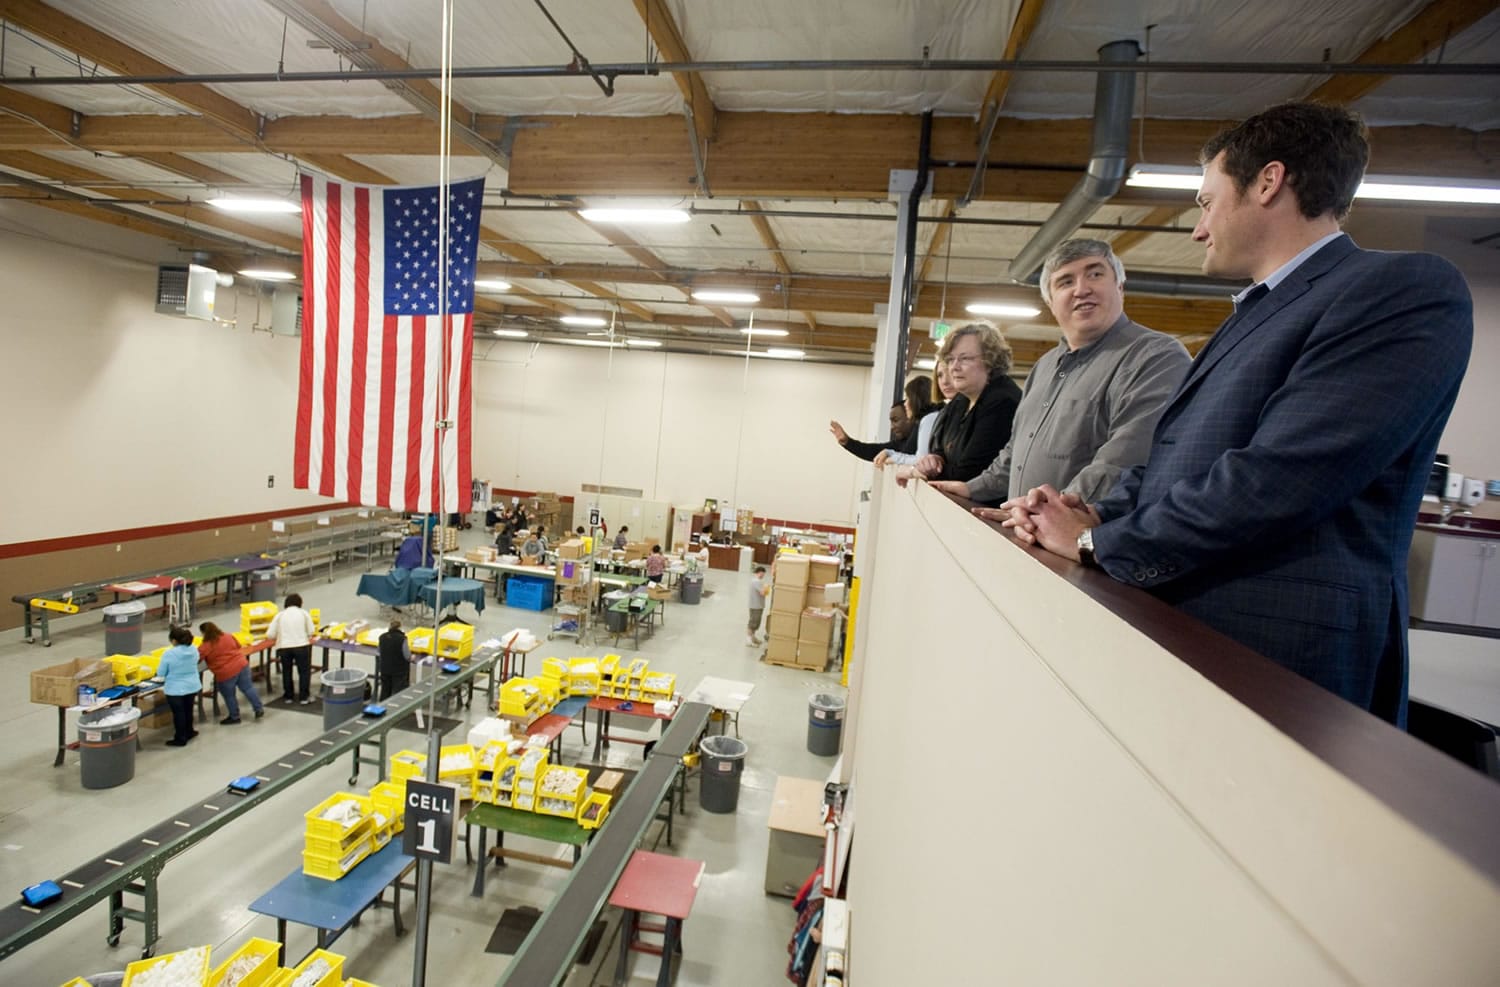 Lucas Reeves, second from right, operations manager of First Aid Only, gives a tour Monday of its facility to Columbia River Economic Development Council officials and Vancouver Mayor Tim Leavitt, right.